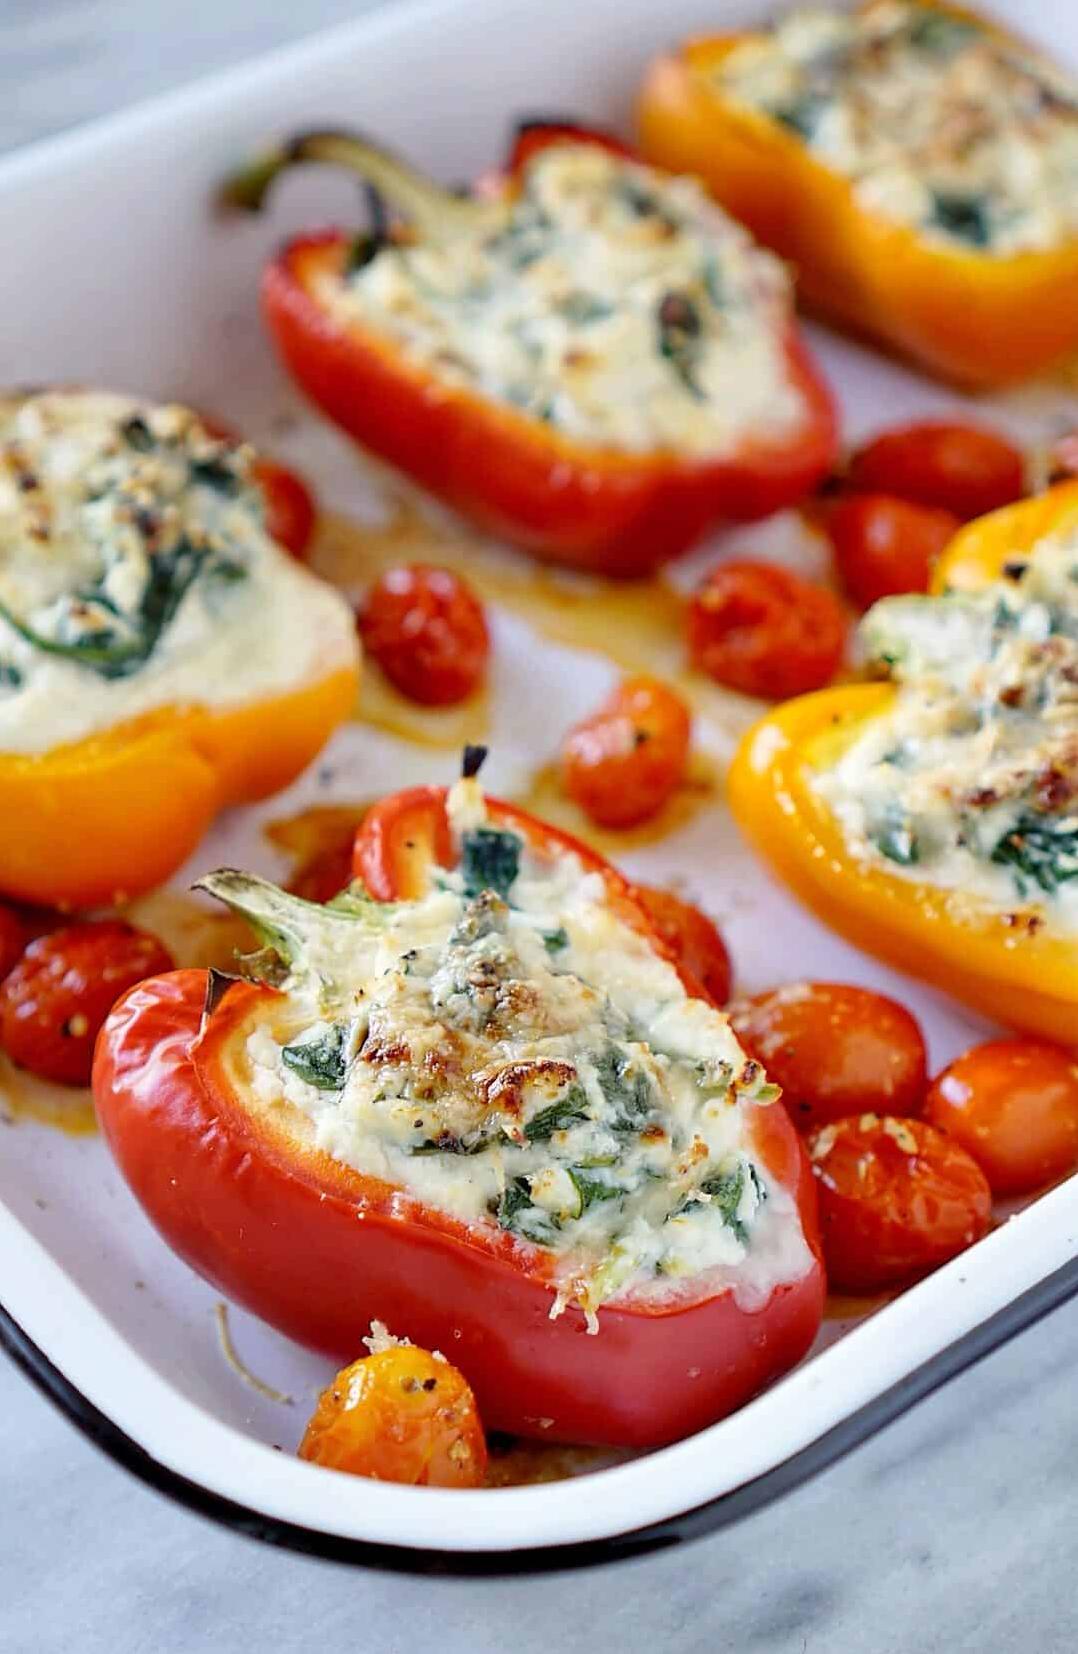  These gorgeous baked peppers are healthy, easy to make, and oh so satisfying!